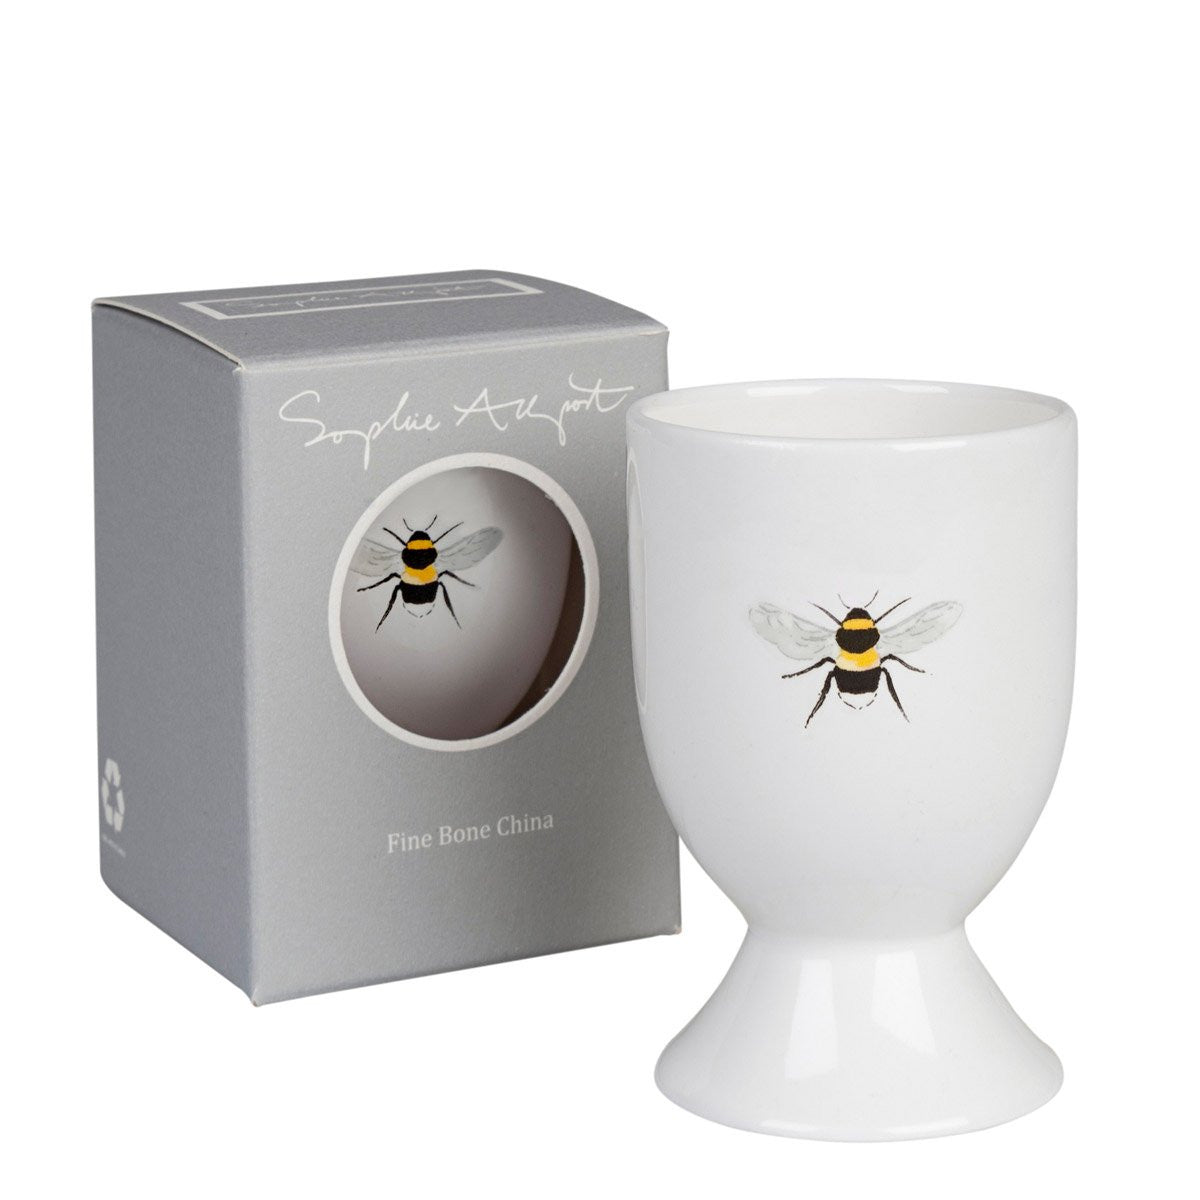 Sophie Allport bone china Bees Egg Cup boxed.